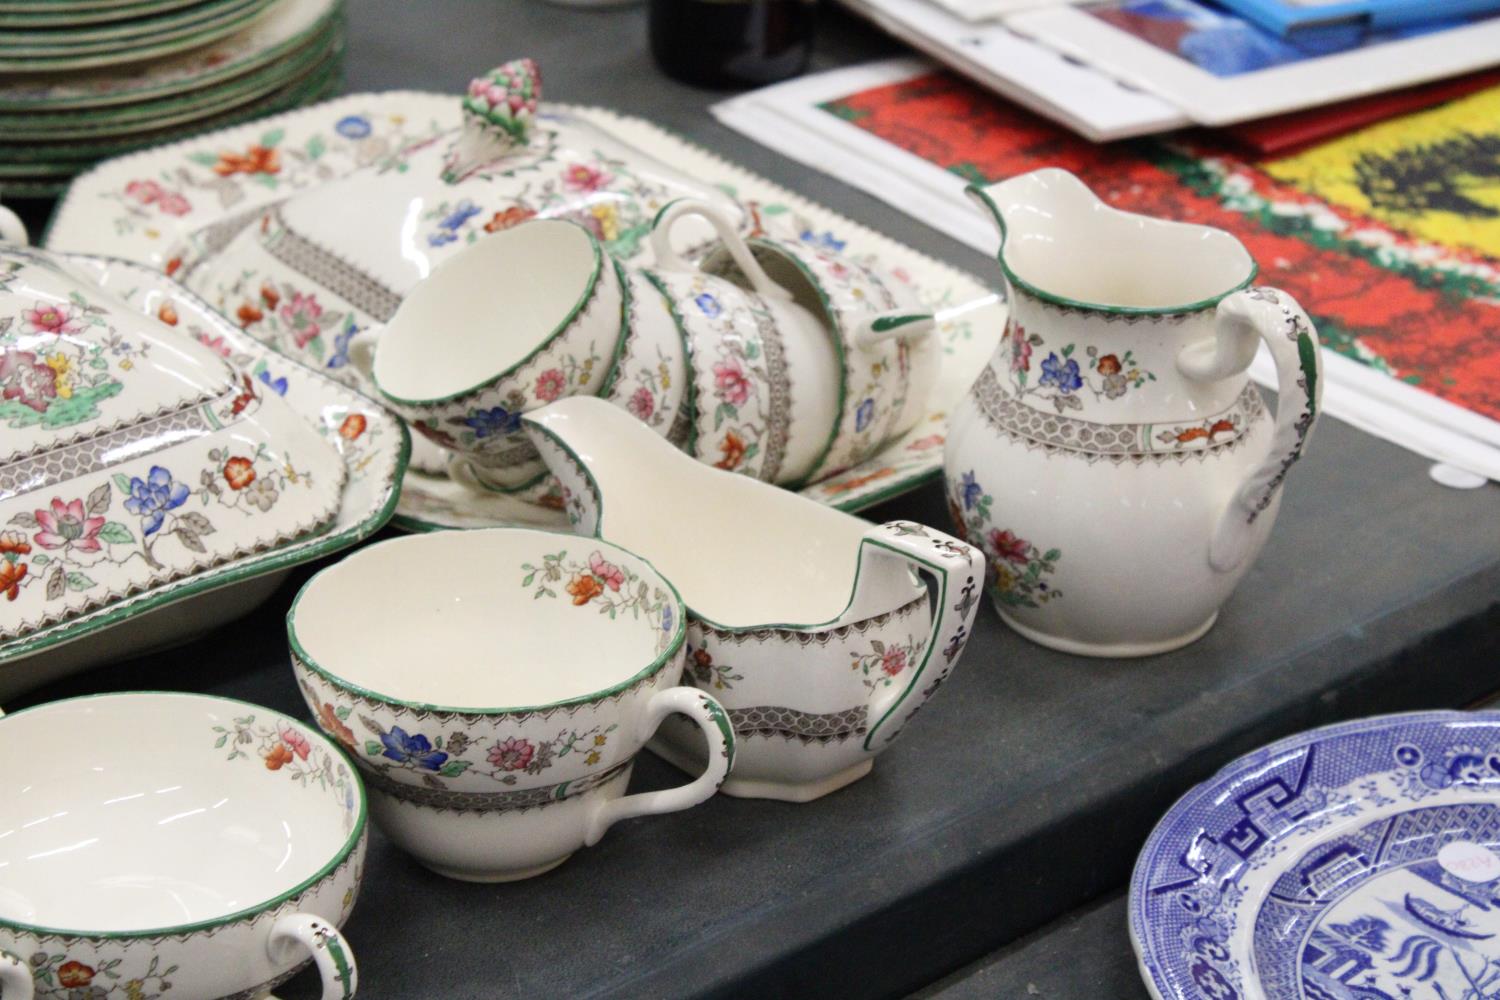 A LARGE SPODE COPELAND "CHINESE ROSE" DINNER SERVICE TO INCLUDE PLATES, SOUP BOWLS, JUGS, A - Image 4 of 9